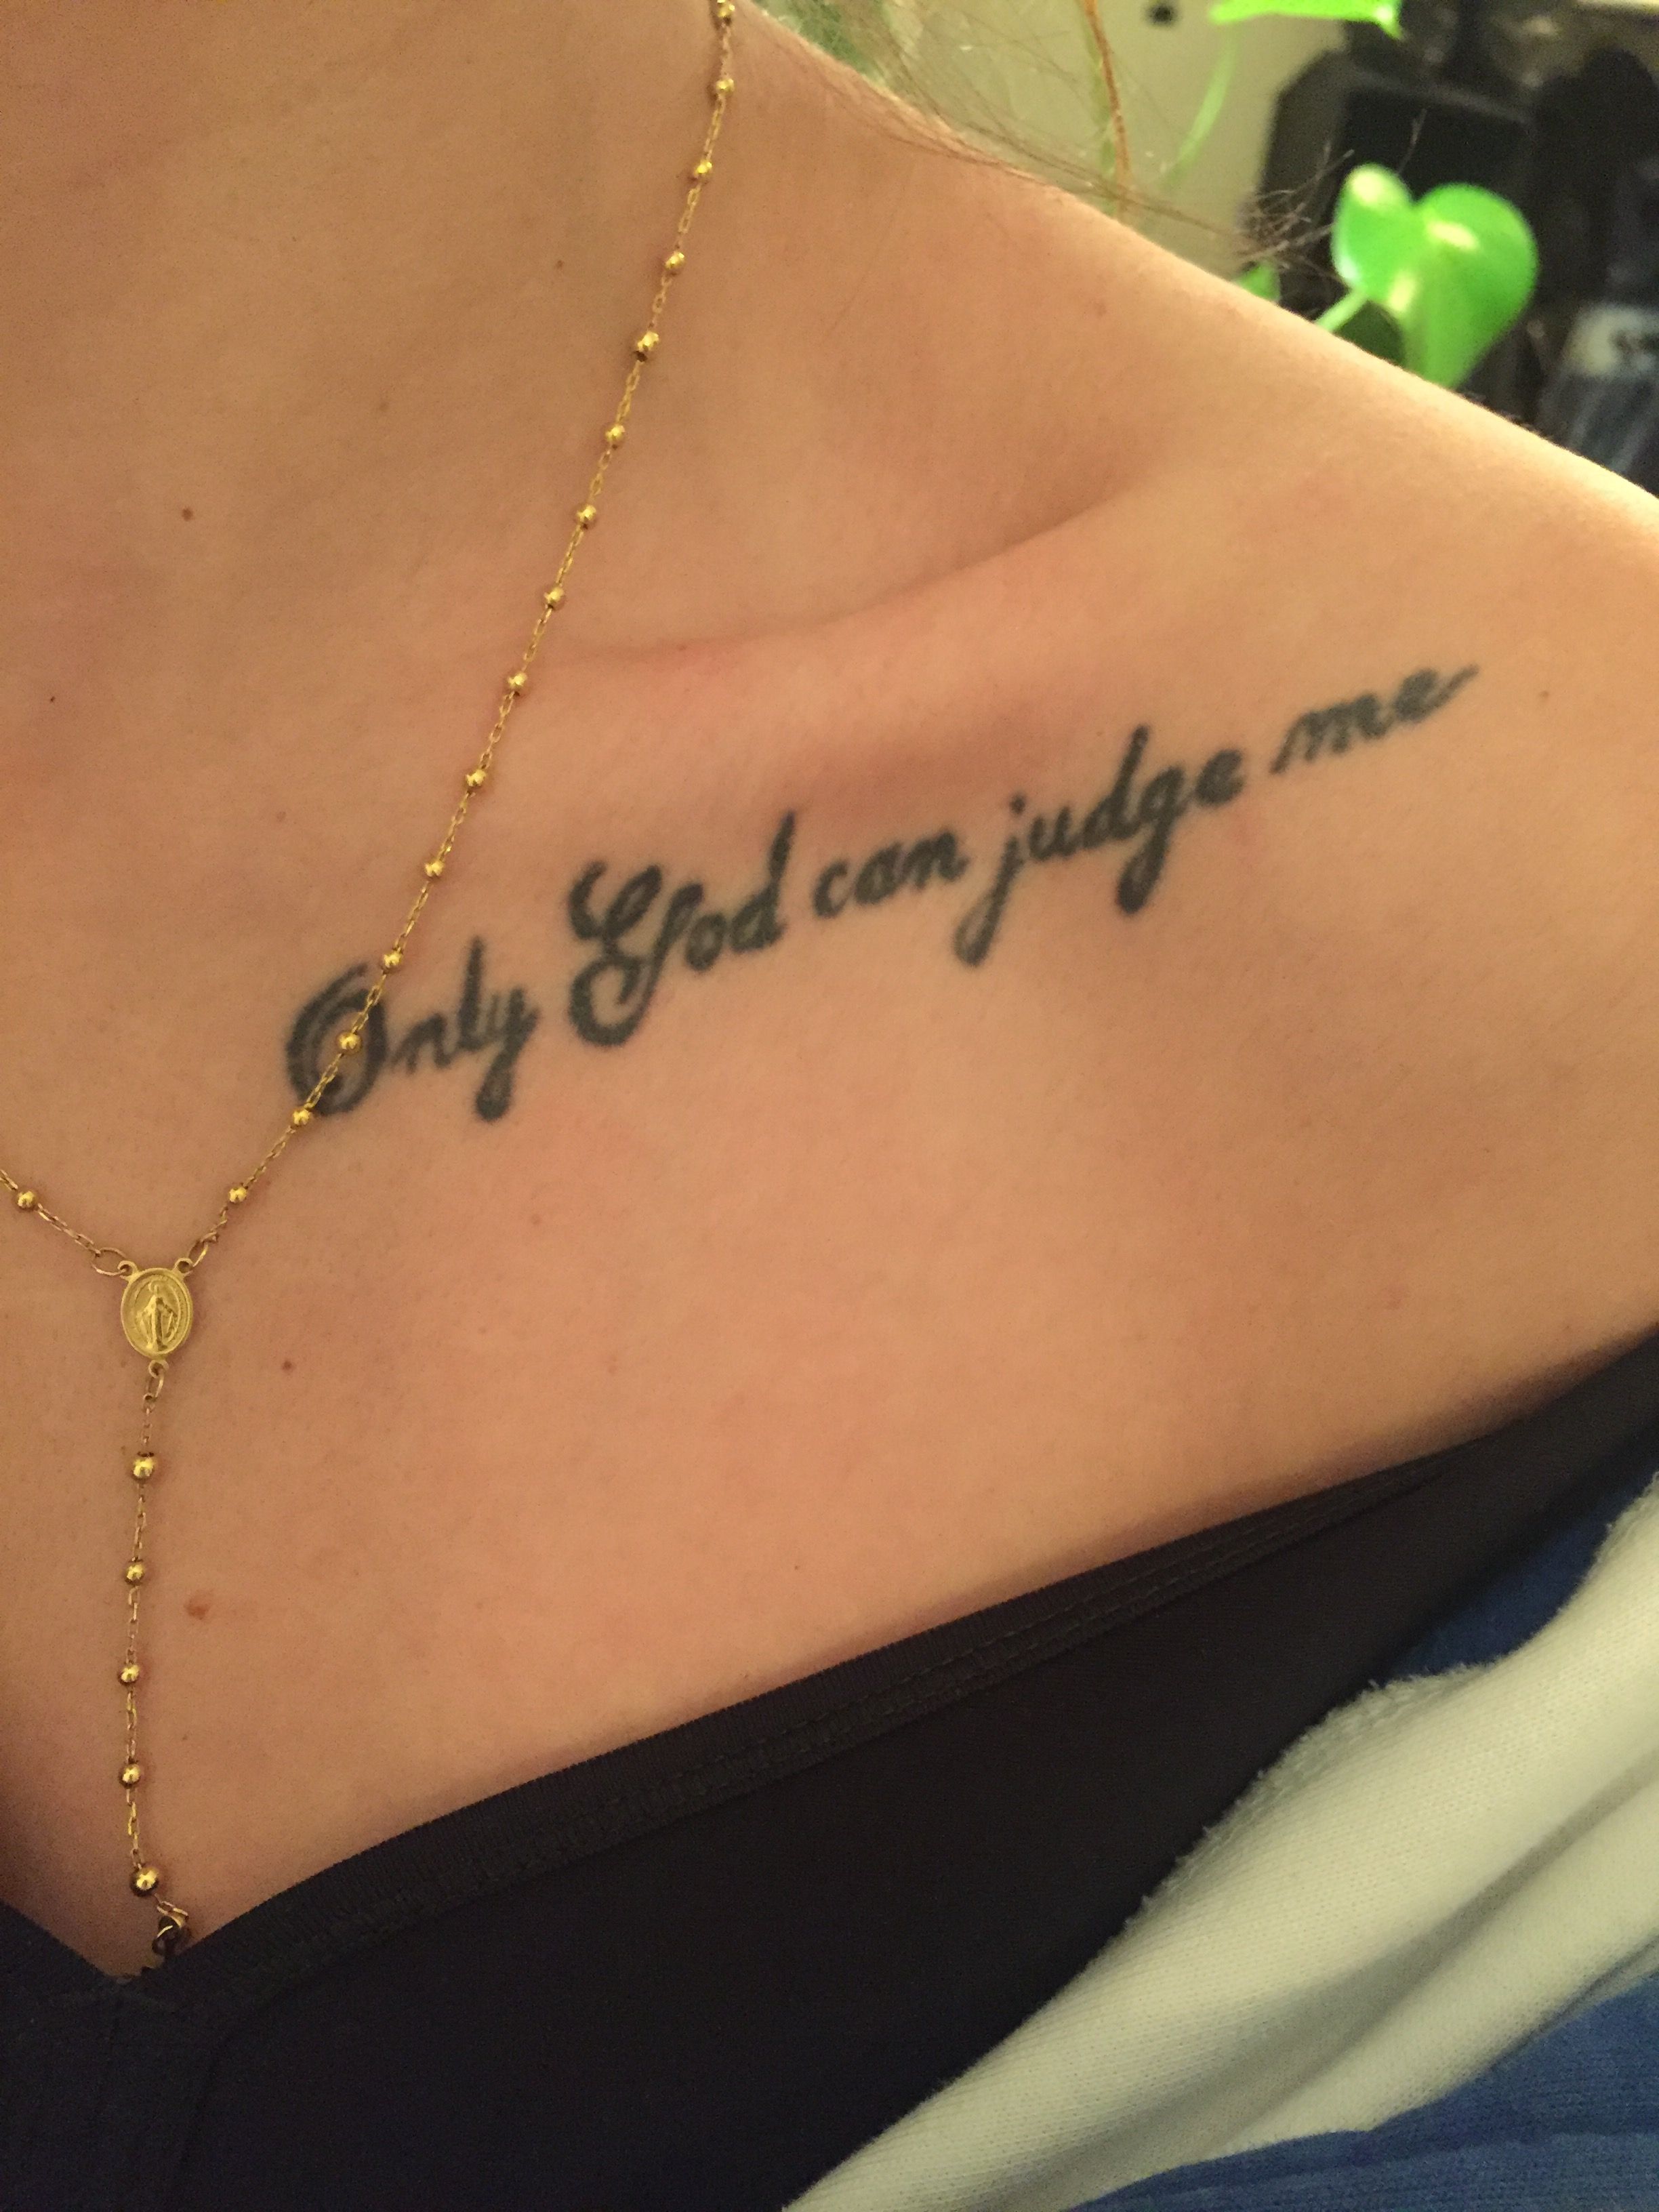 Only God Can Judge Me Tattoo On Chest - Tattoo , HD Wallpaper & Backgrounds